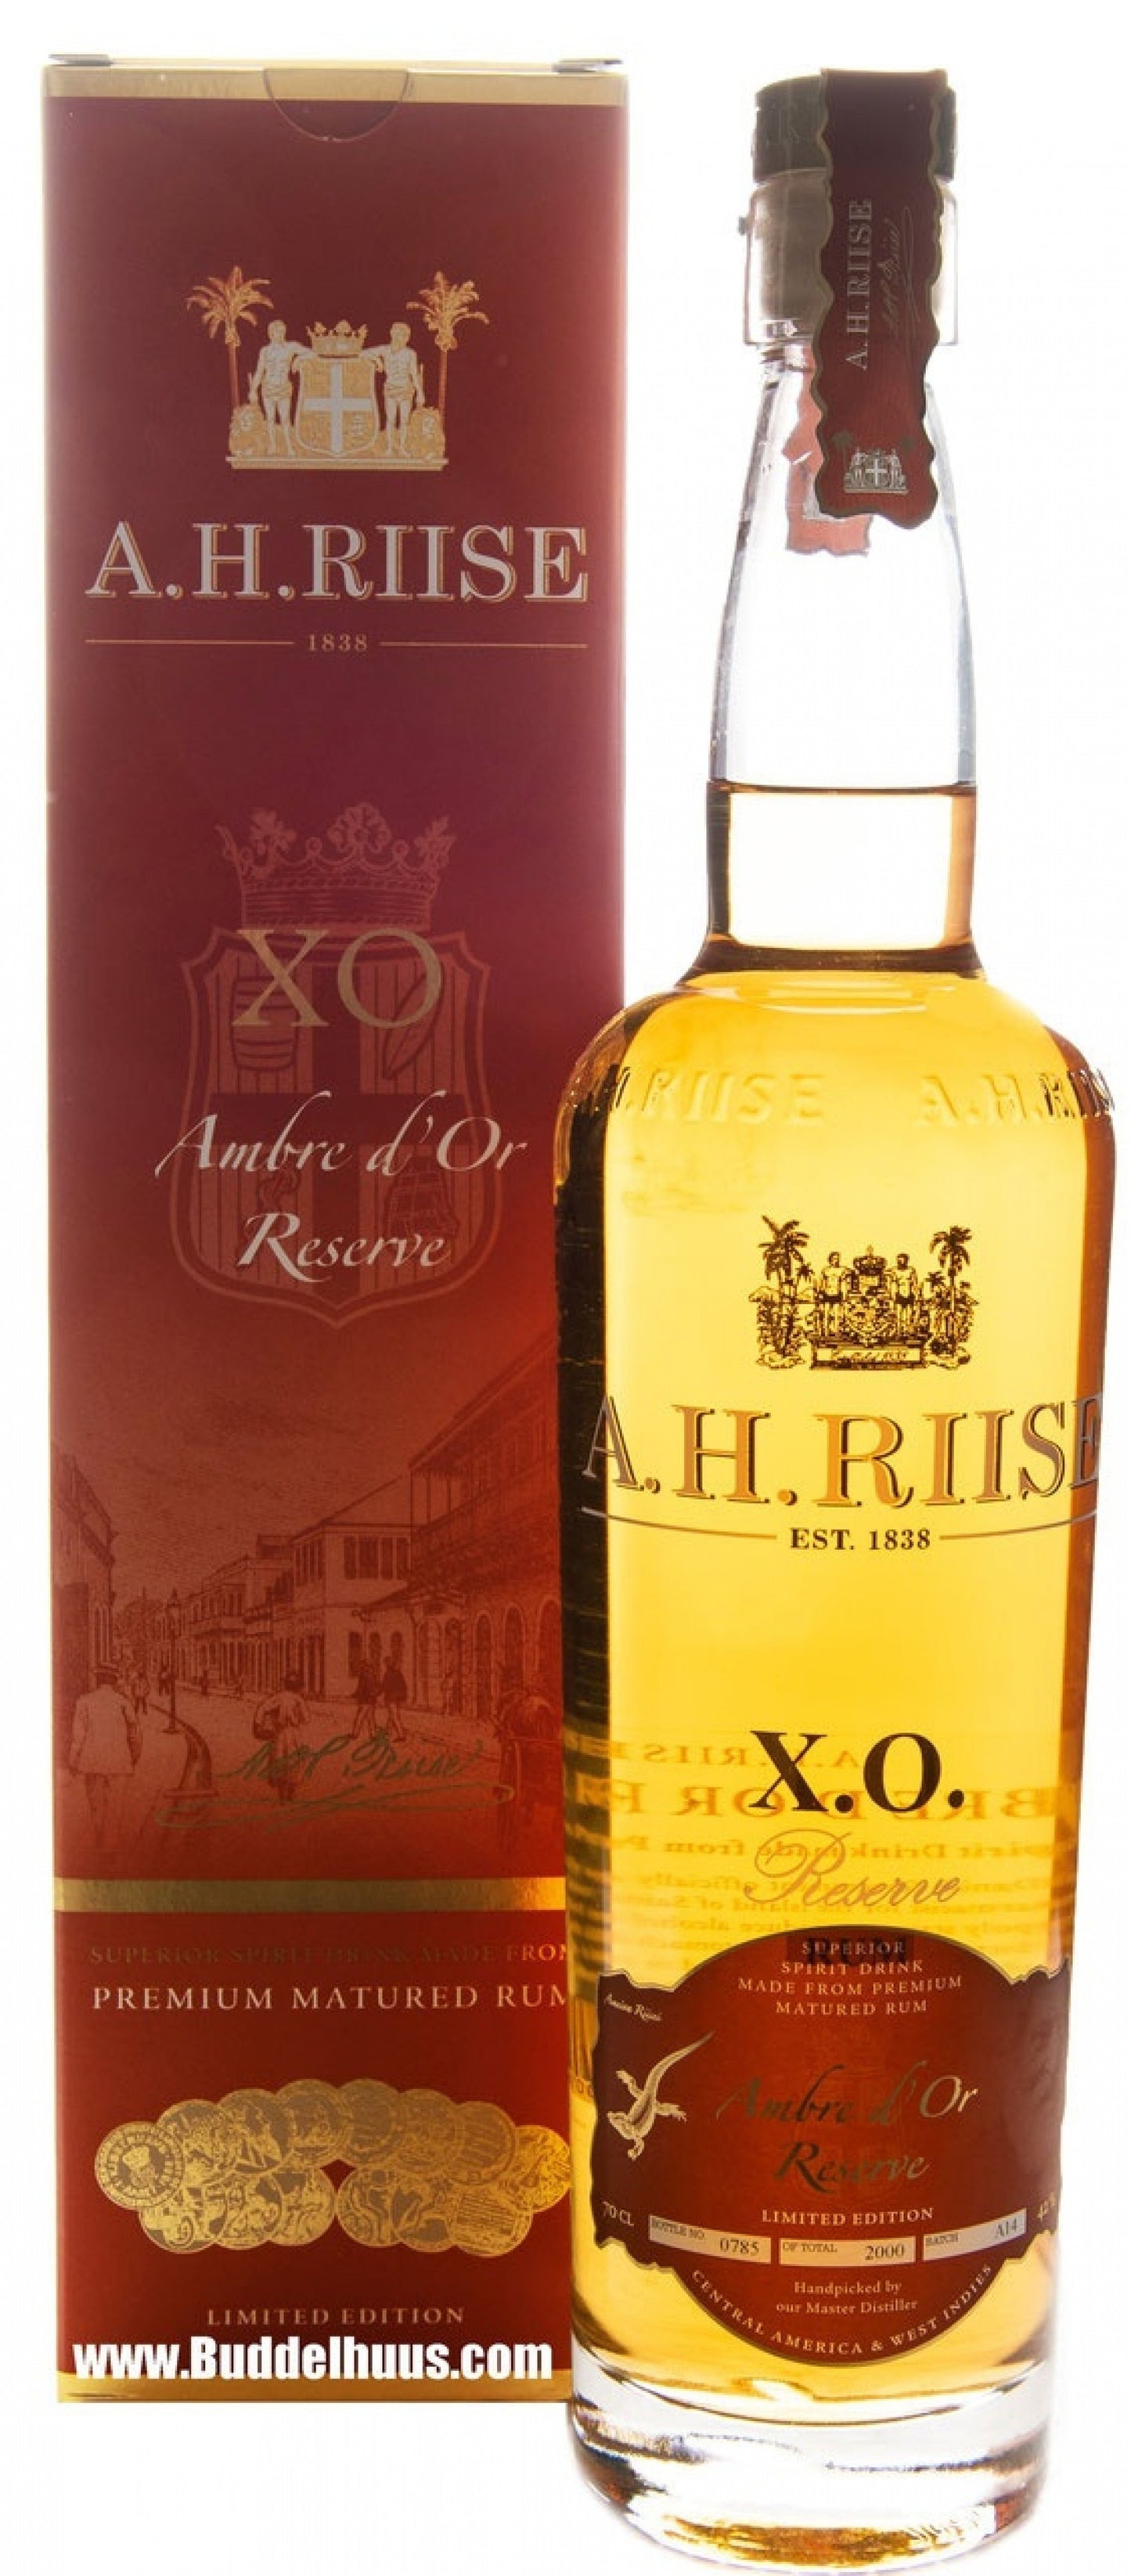 A.H. Riise XO Reserve Ambre D'or Excellence